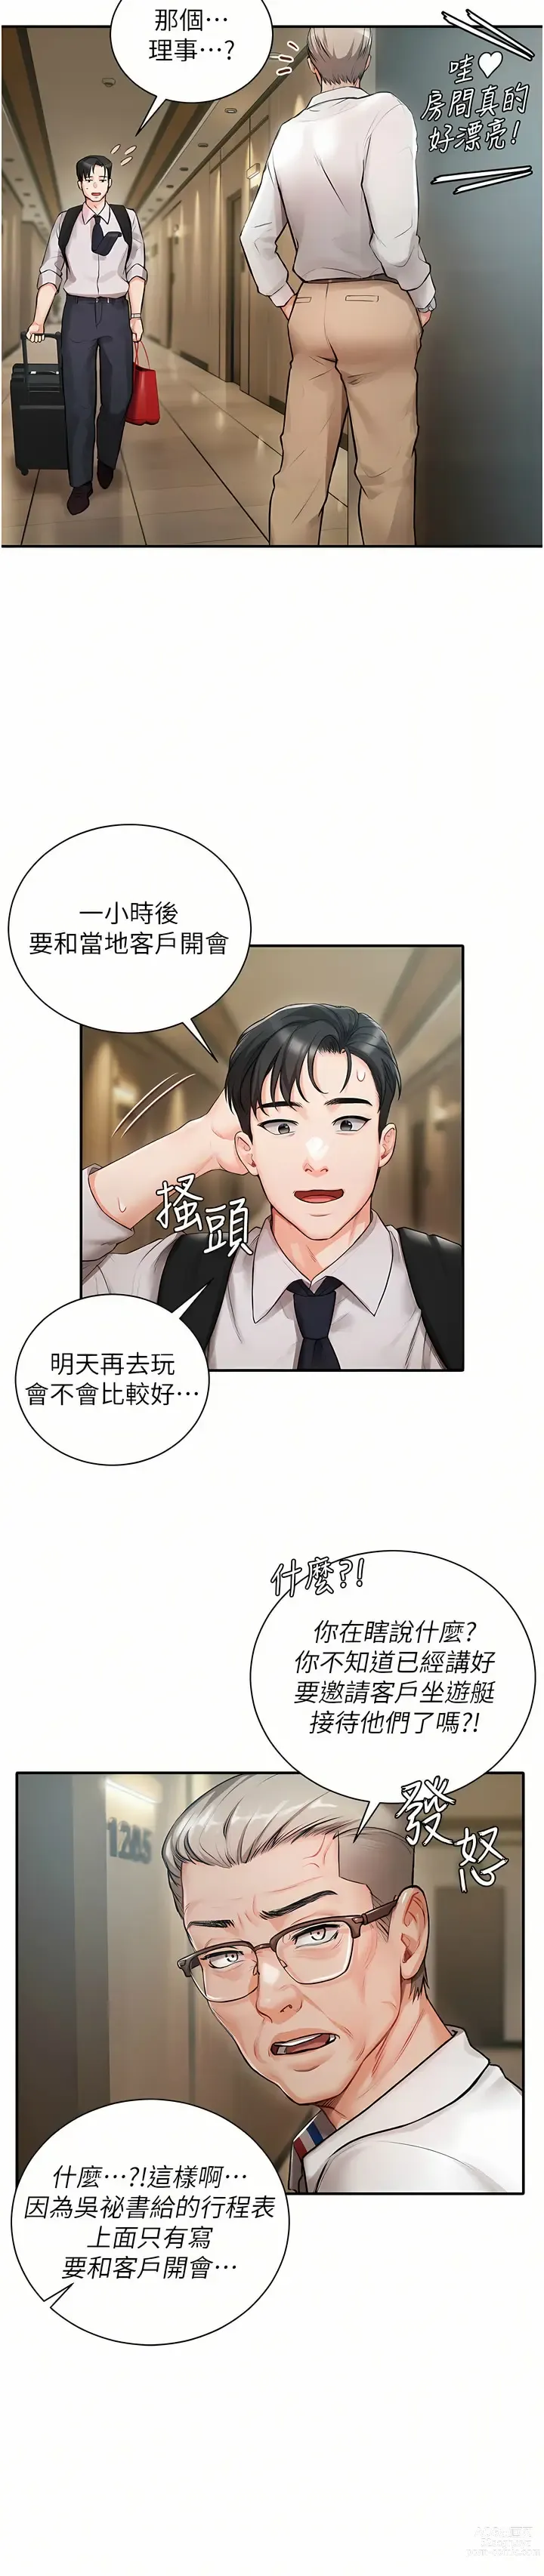 Page 14 of manga 私宅女主人／Hyeonjung’s Residence